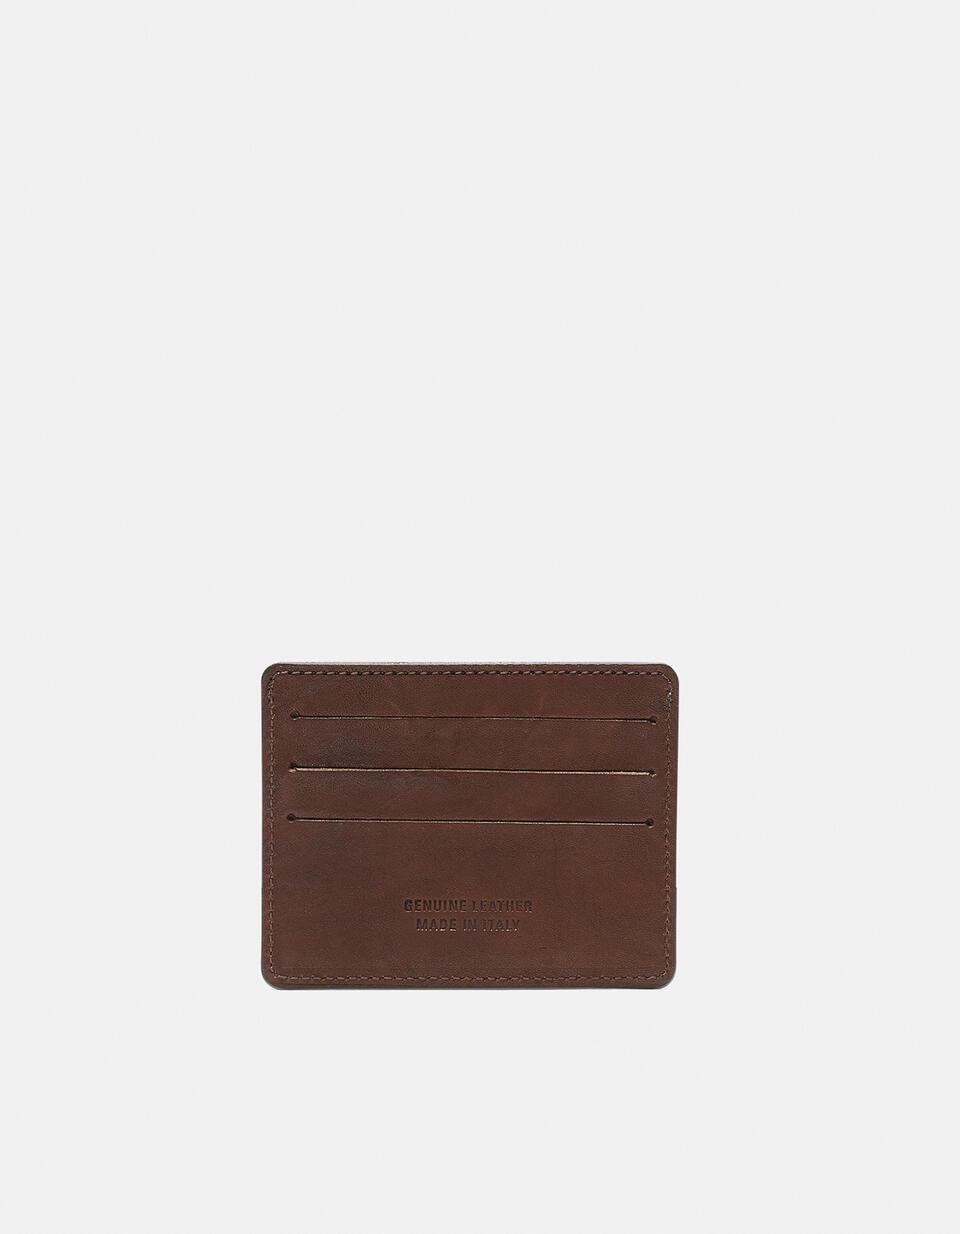 Bourbon credit card holder with banknote holder opening - Card Holders - Men's Wallets | Wallets TESTA DI MORO - Card Holders - Men's Wallets | WalletsCuoieria Fiorentina